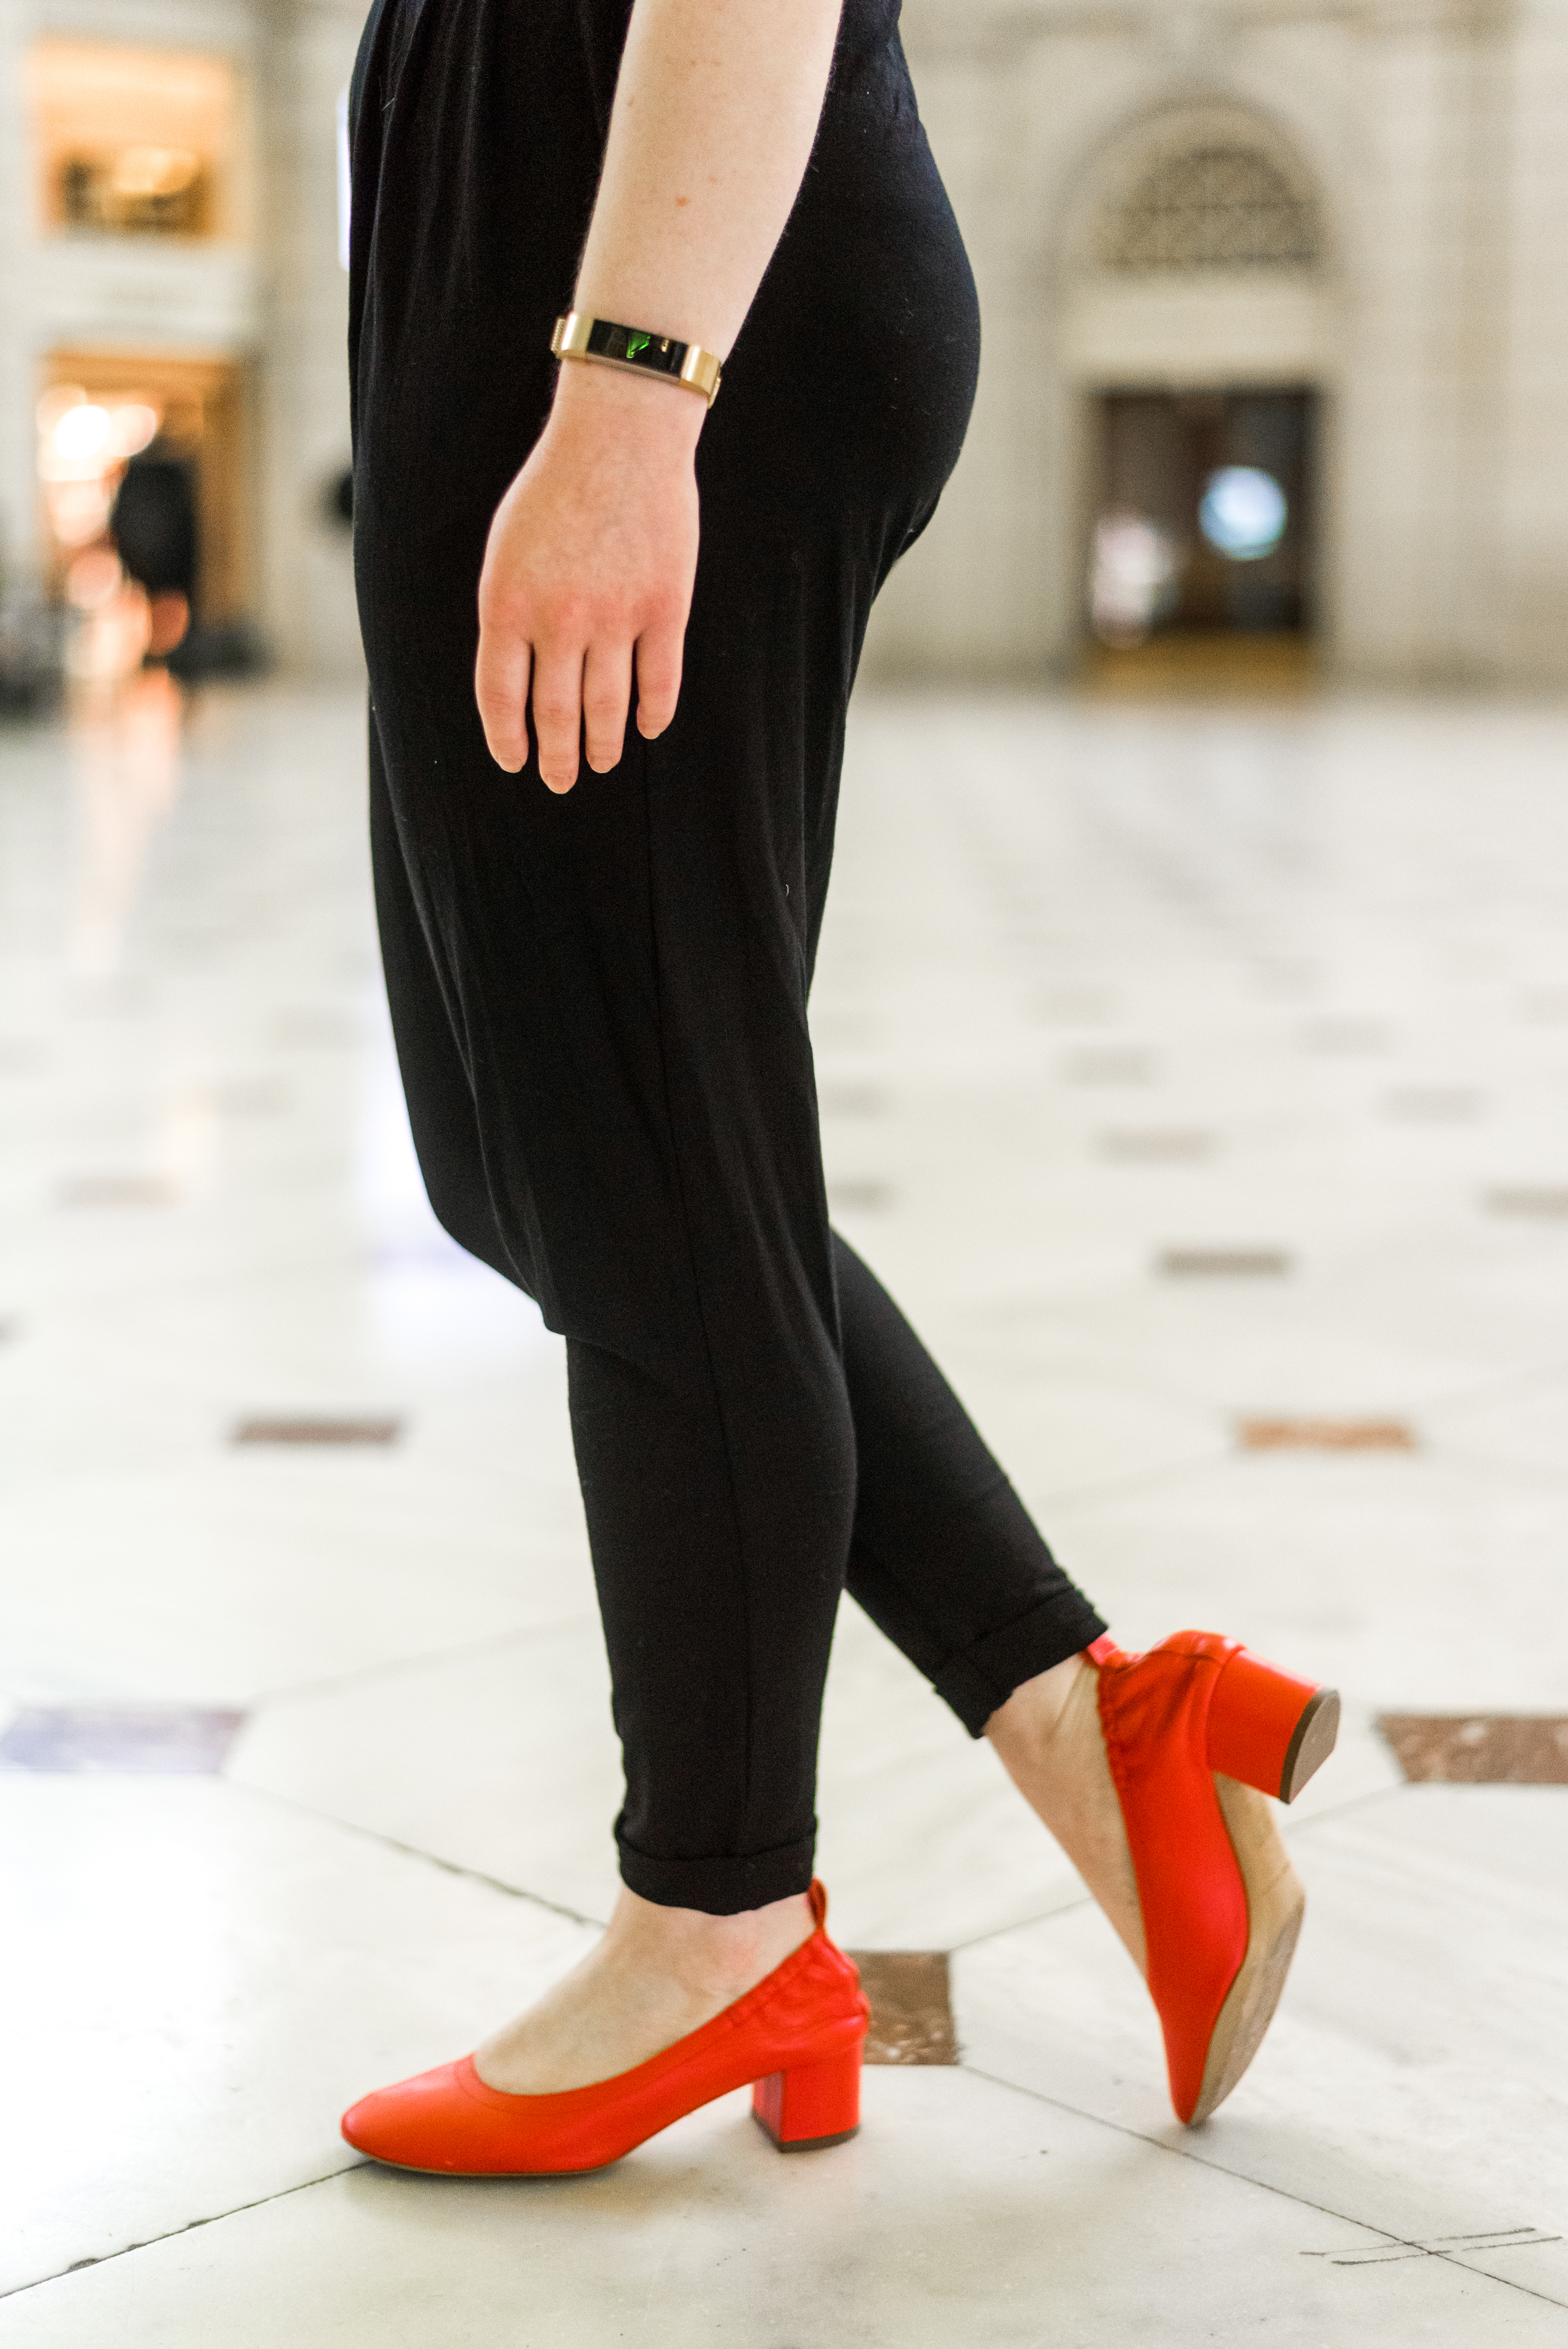 DC woman blogger wearing Everlane the Day Heel